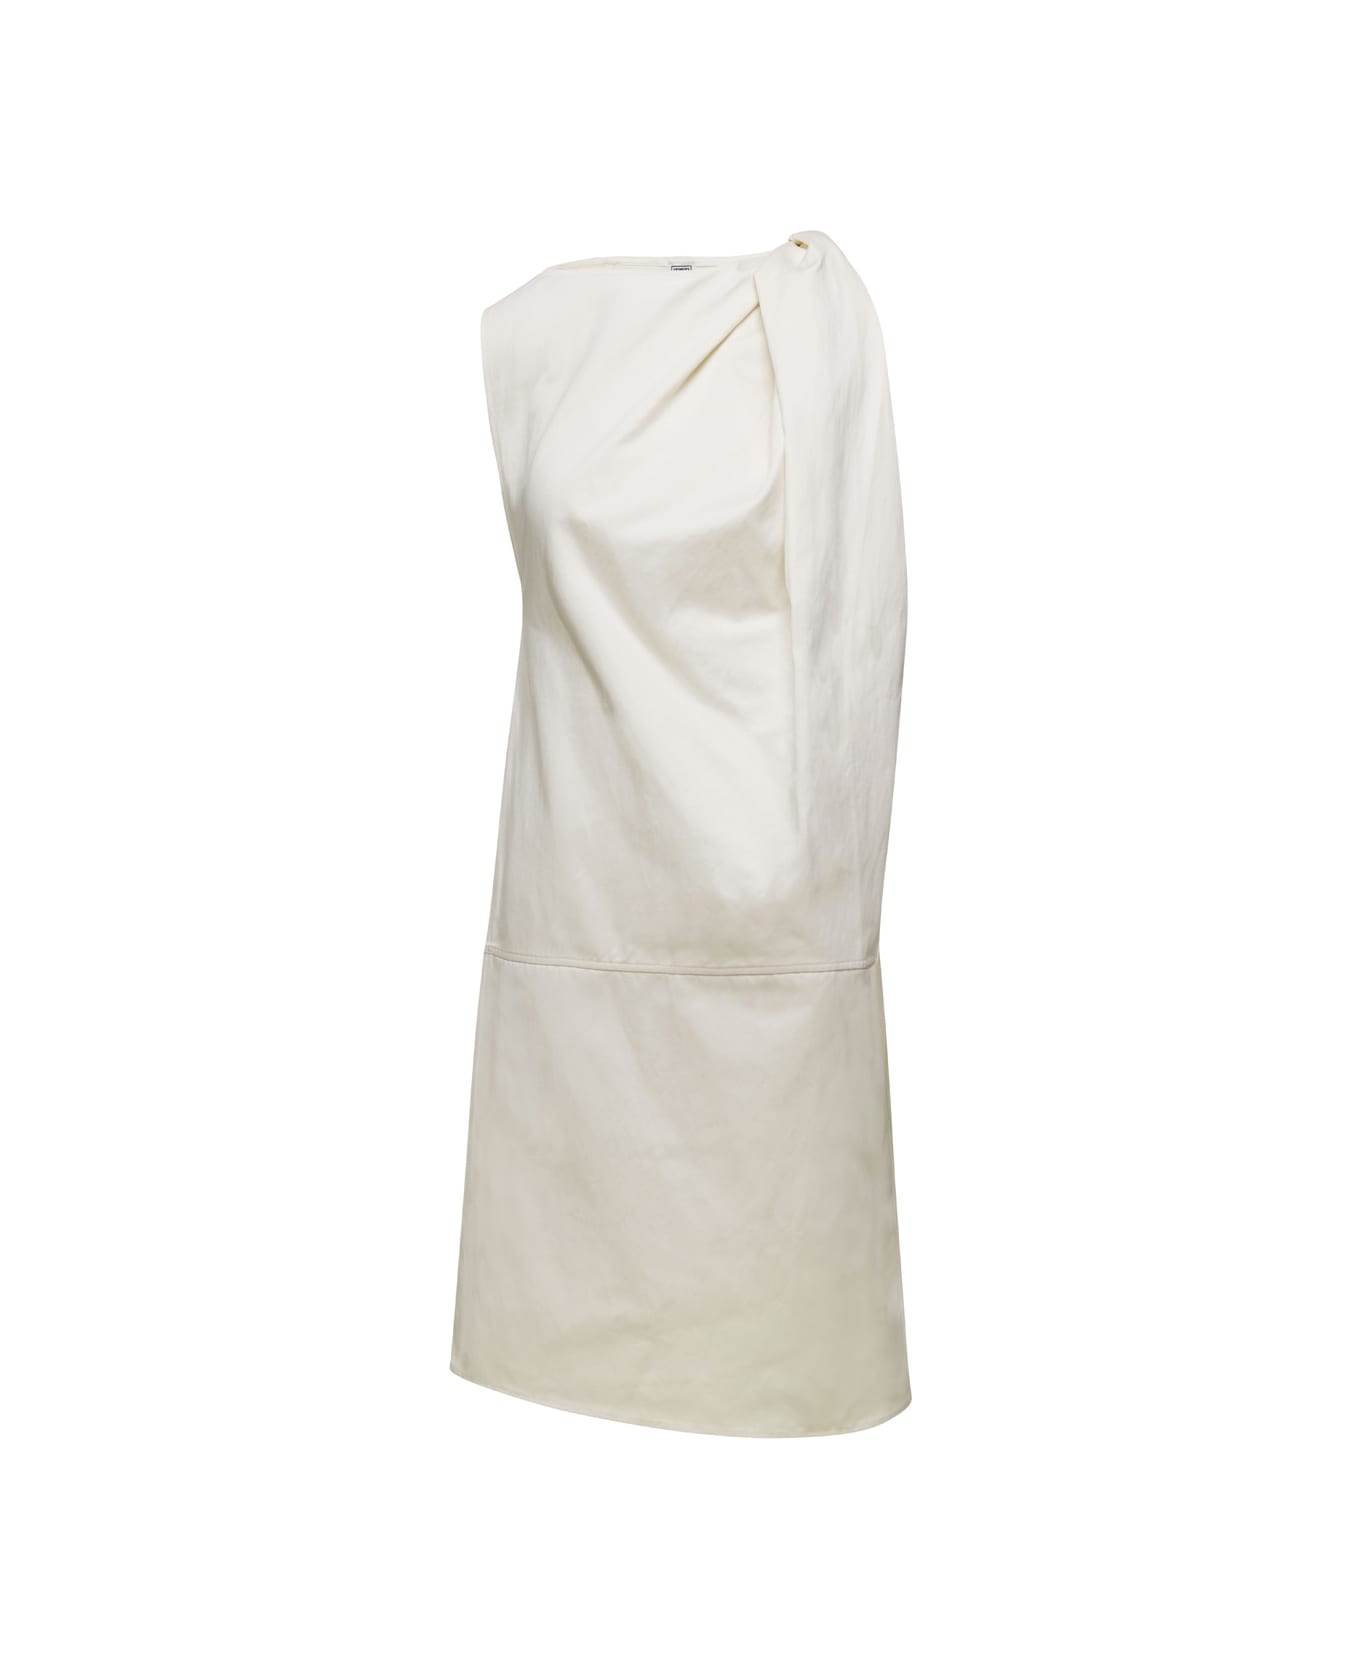 Totême Mini White Dress With Gathering On Shoulder In Cotton Blend Woman - White ワンピース＆ドレス